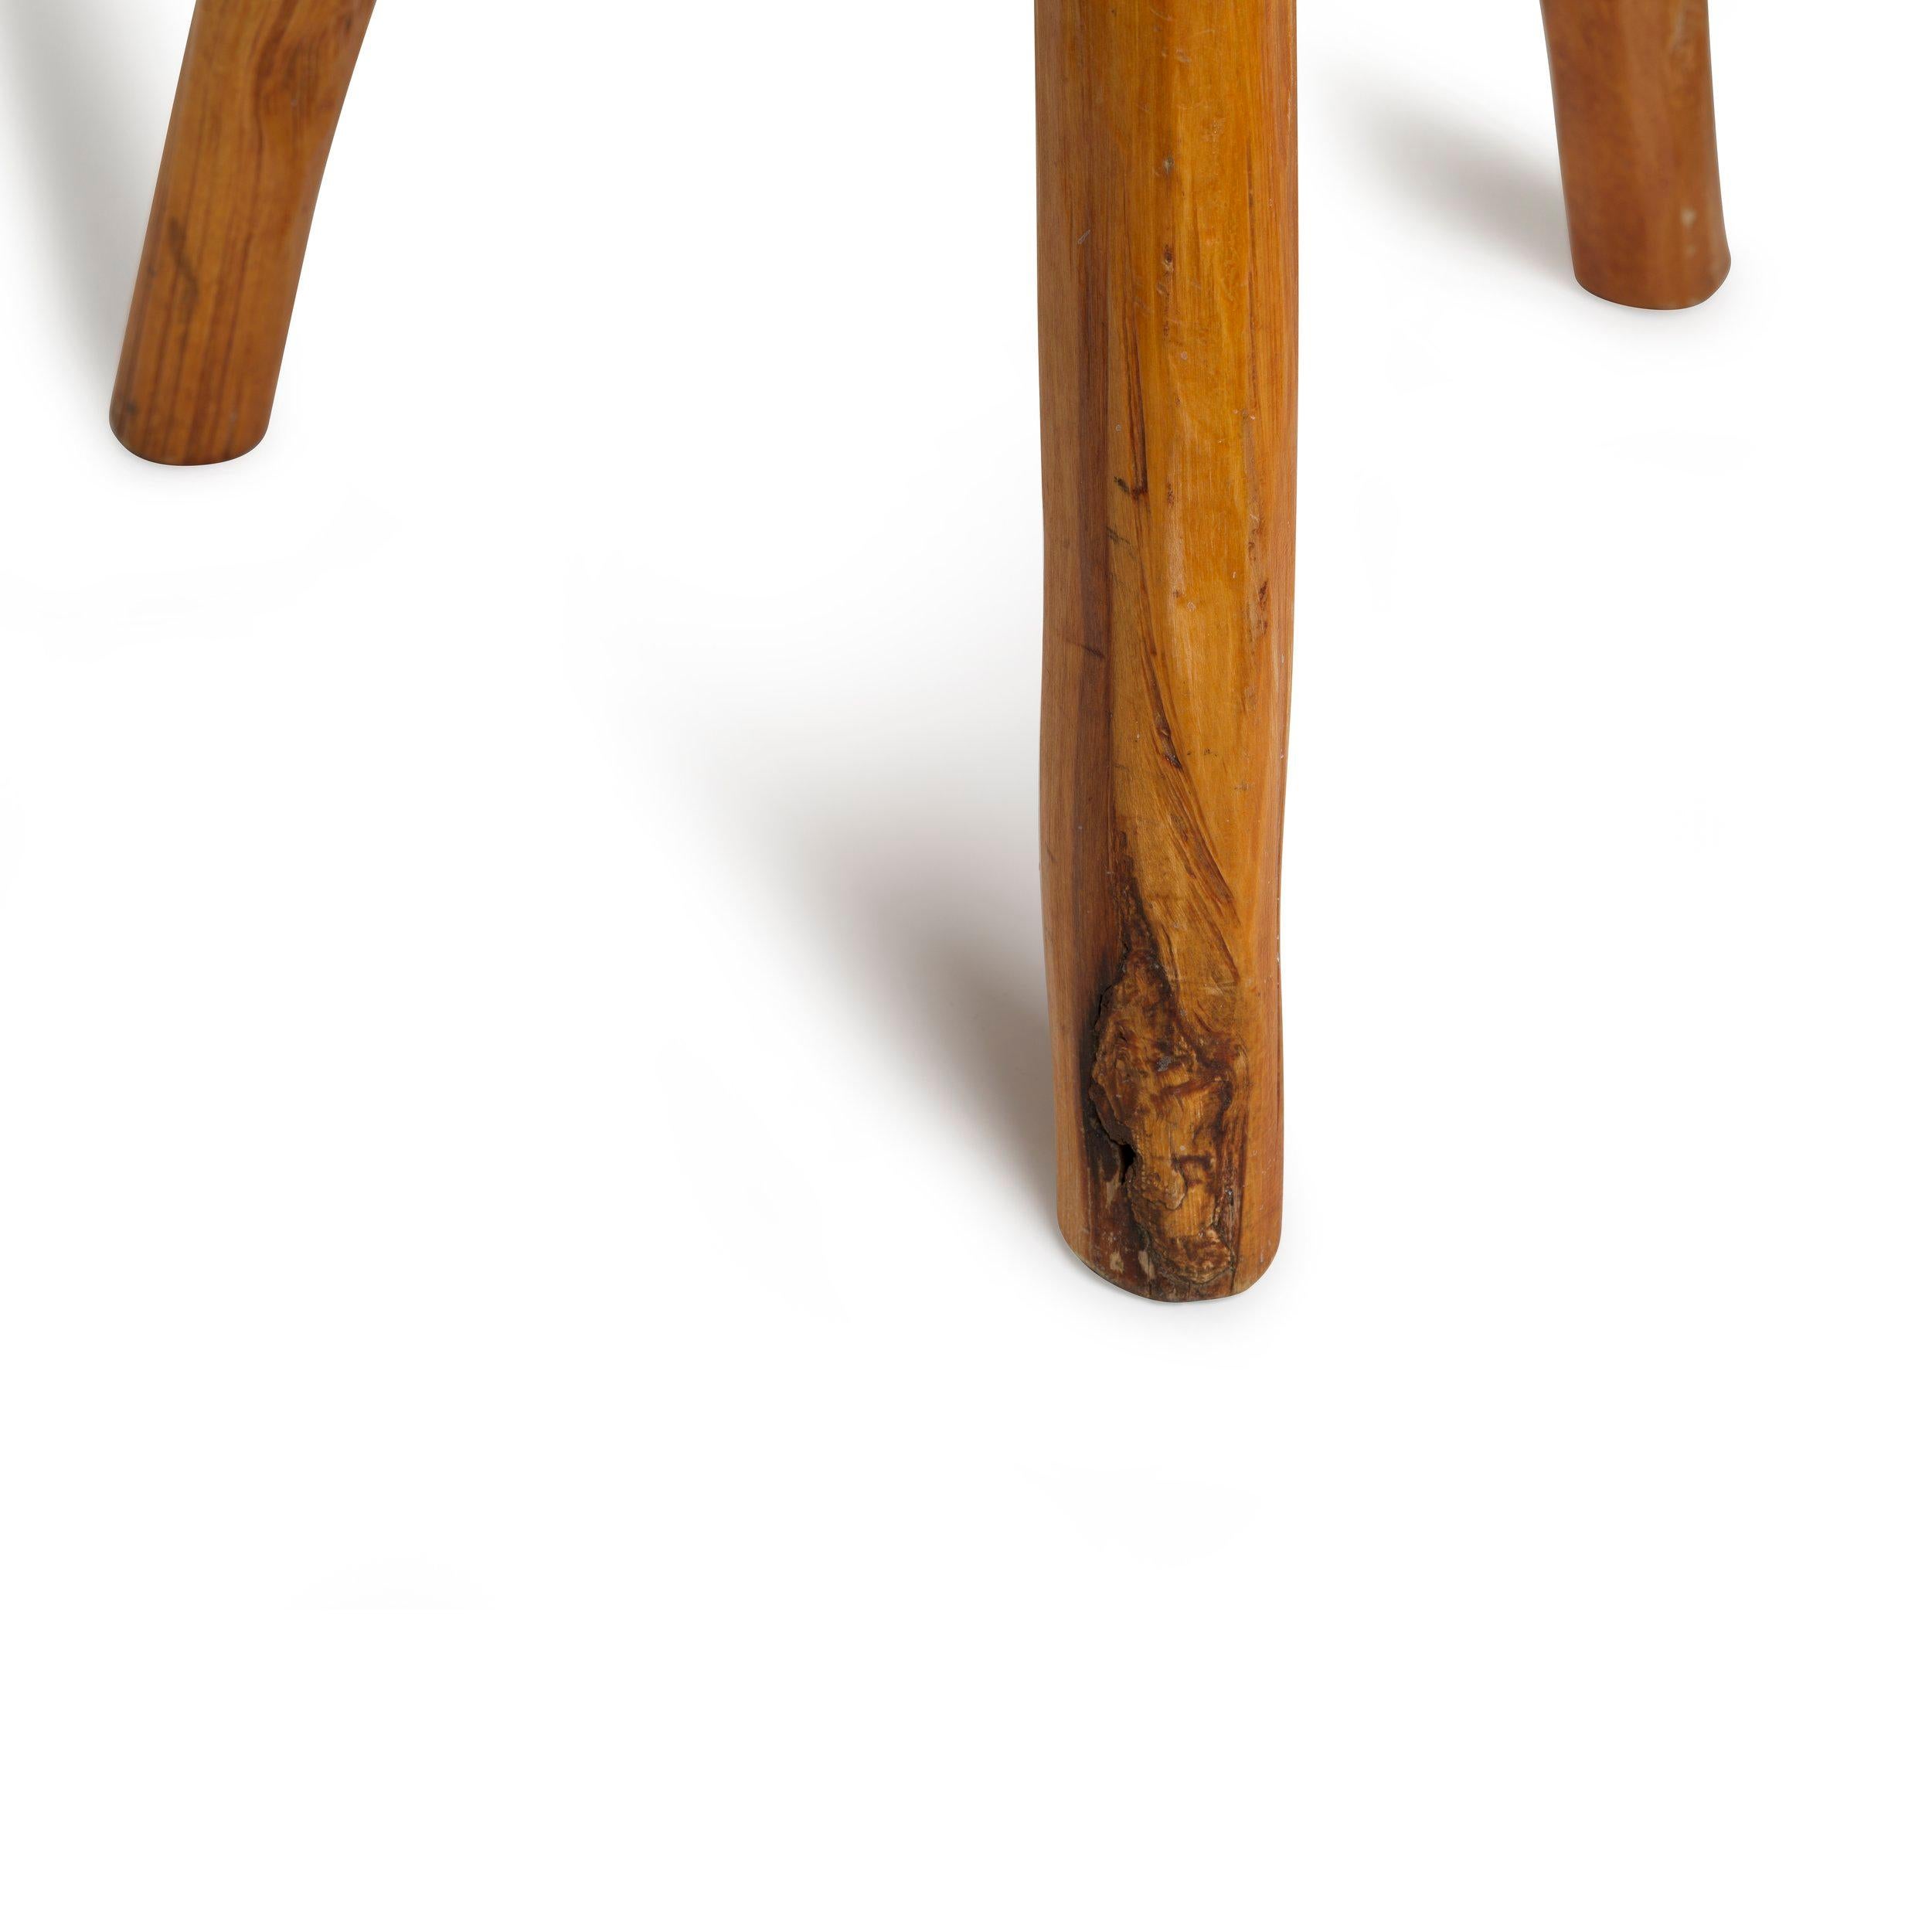 20th Century European Mid-Century Wooden Stools with Hand-Carved Scoop Seats, Europe ca 1950s For Sale